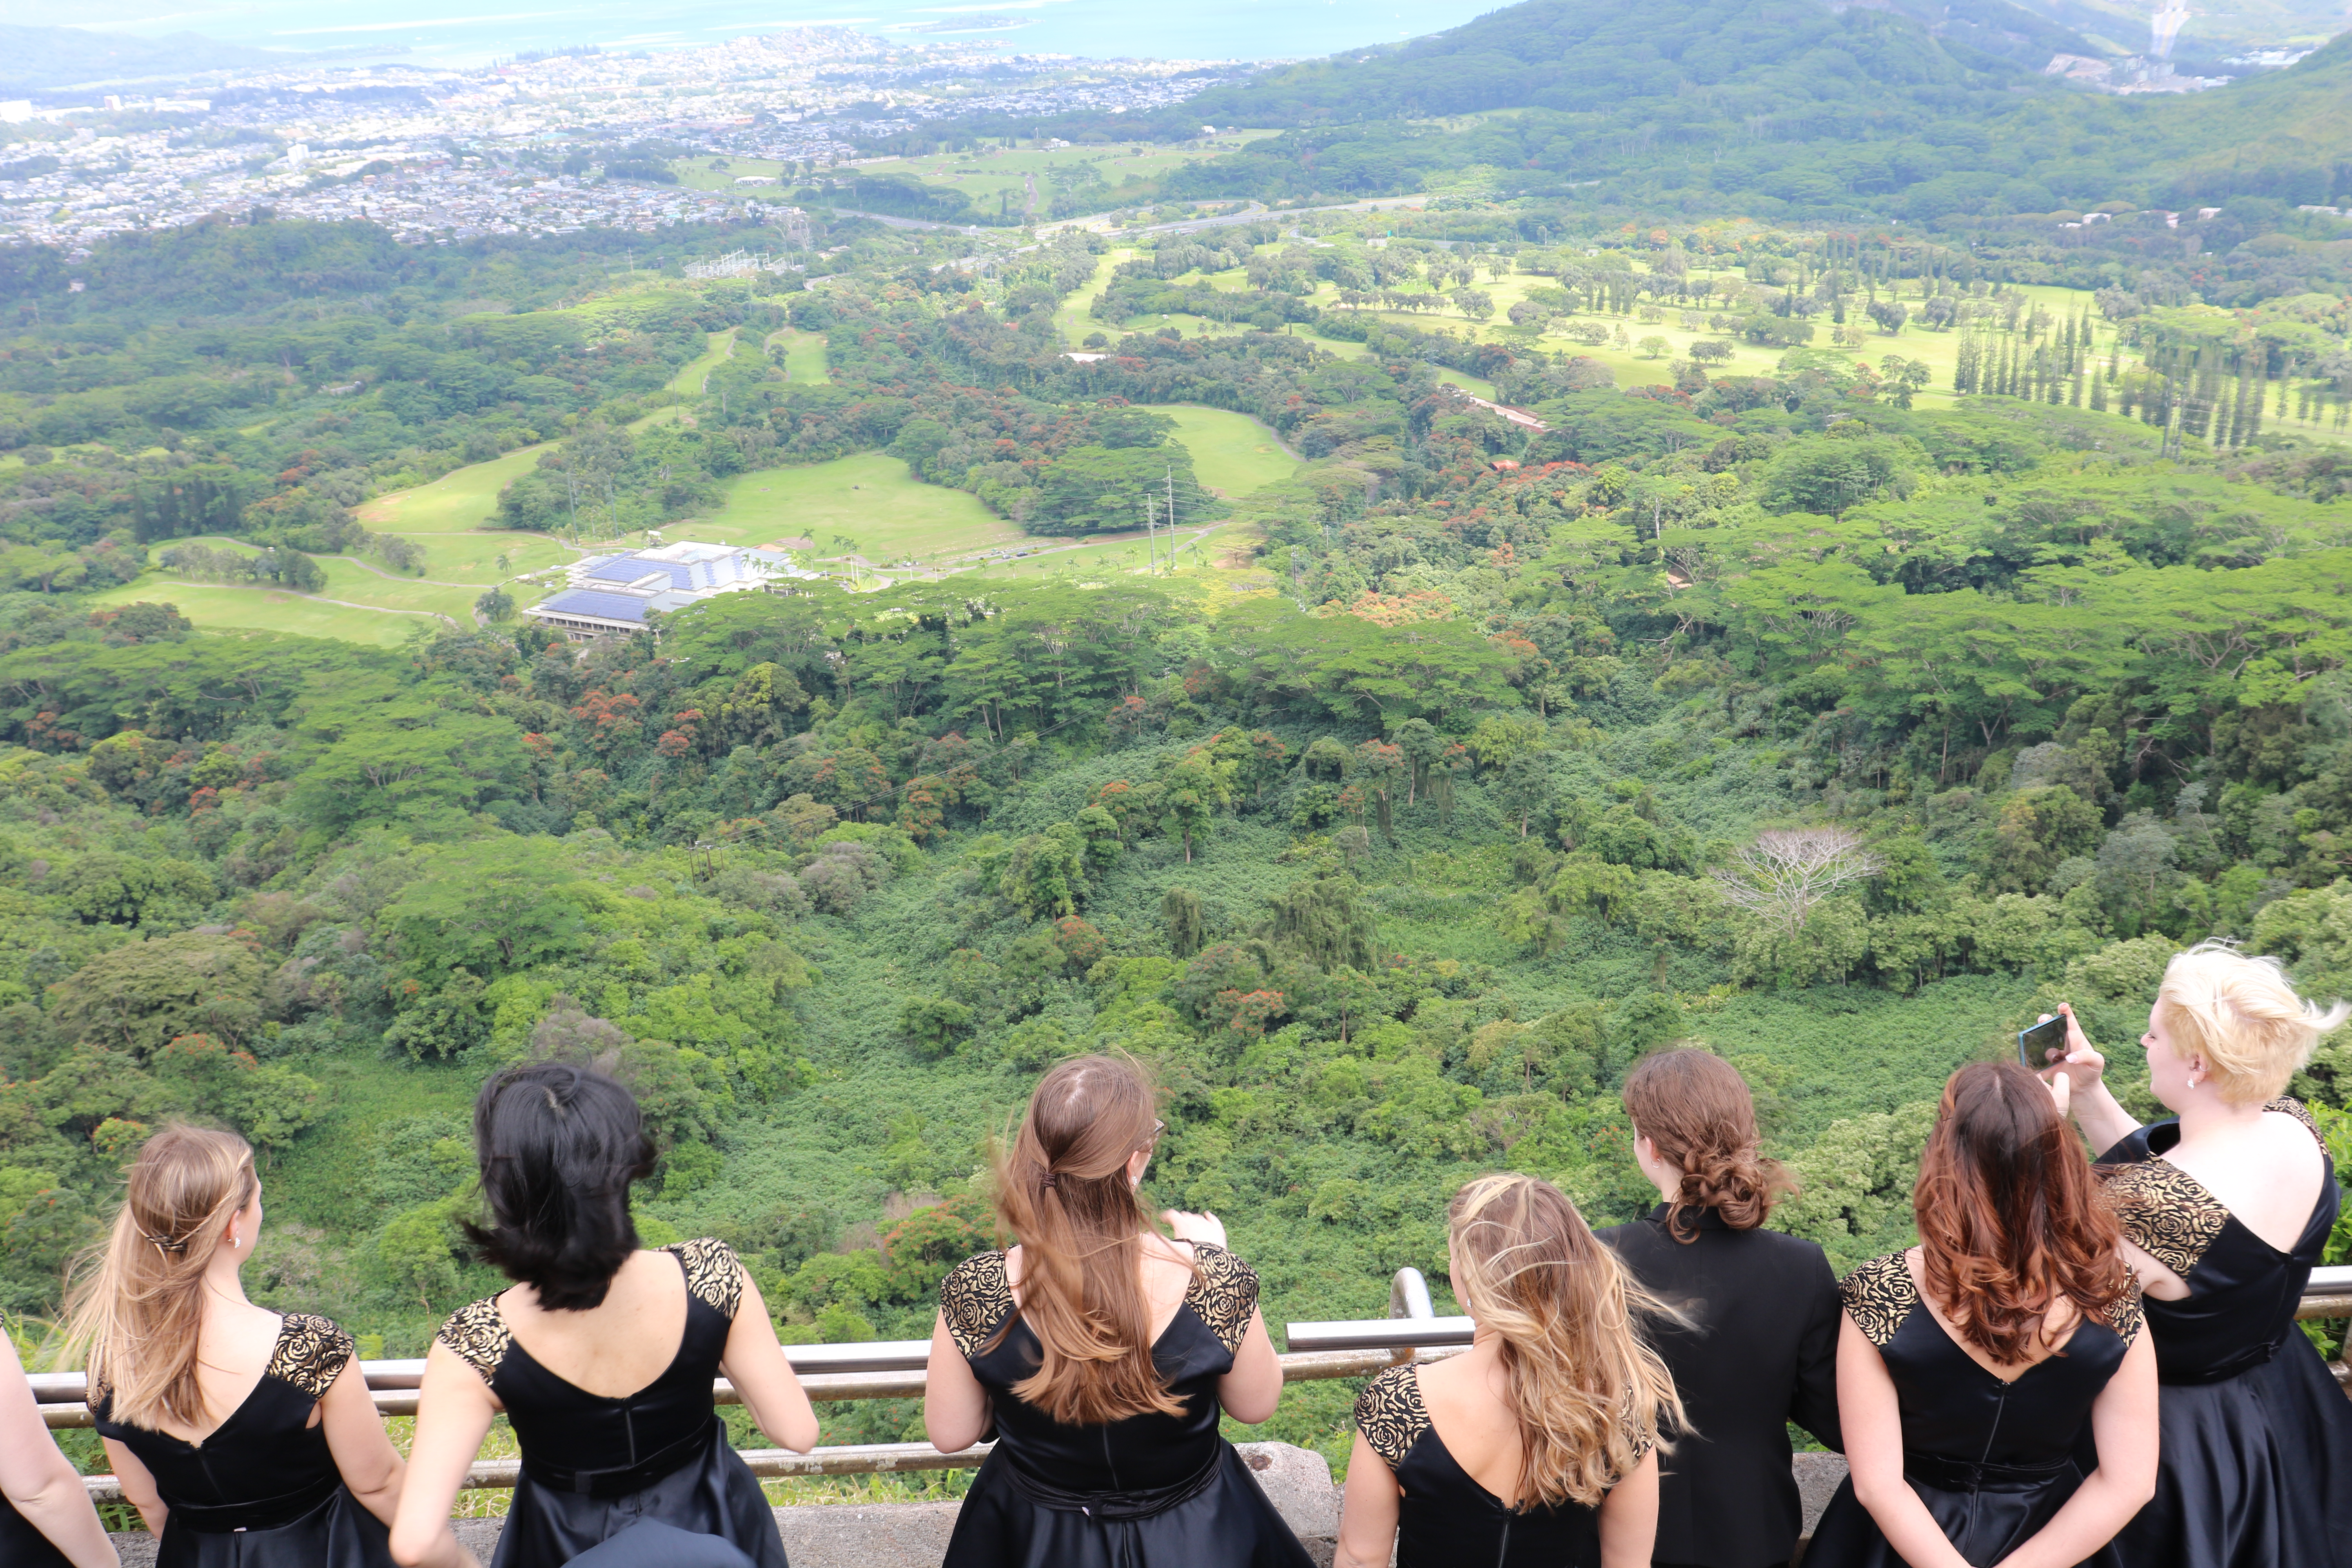 Picture of Purduettes looking out at a scenic Hawaii landscape